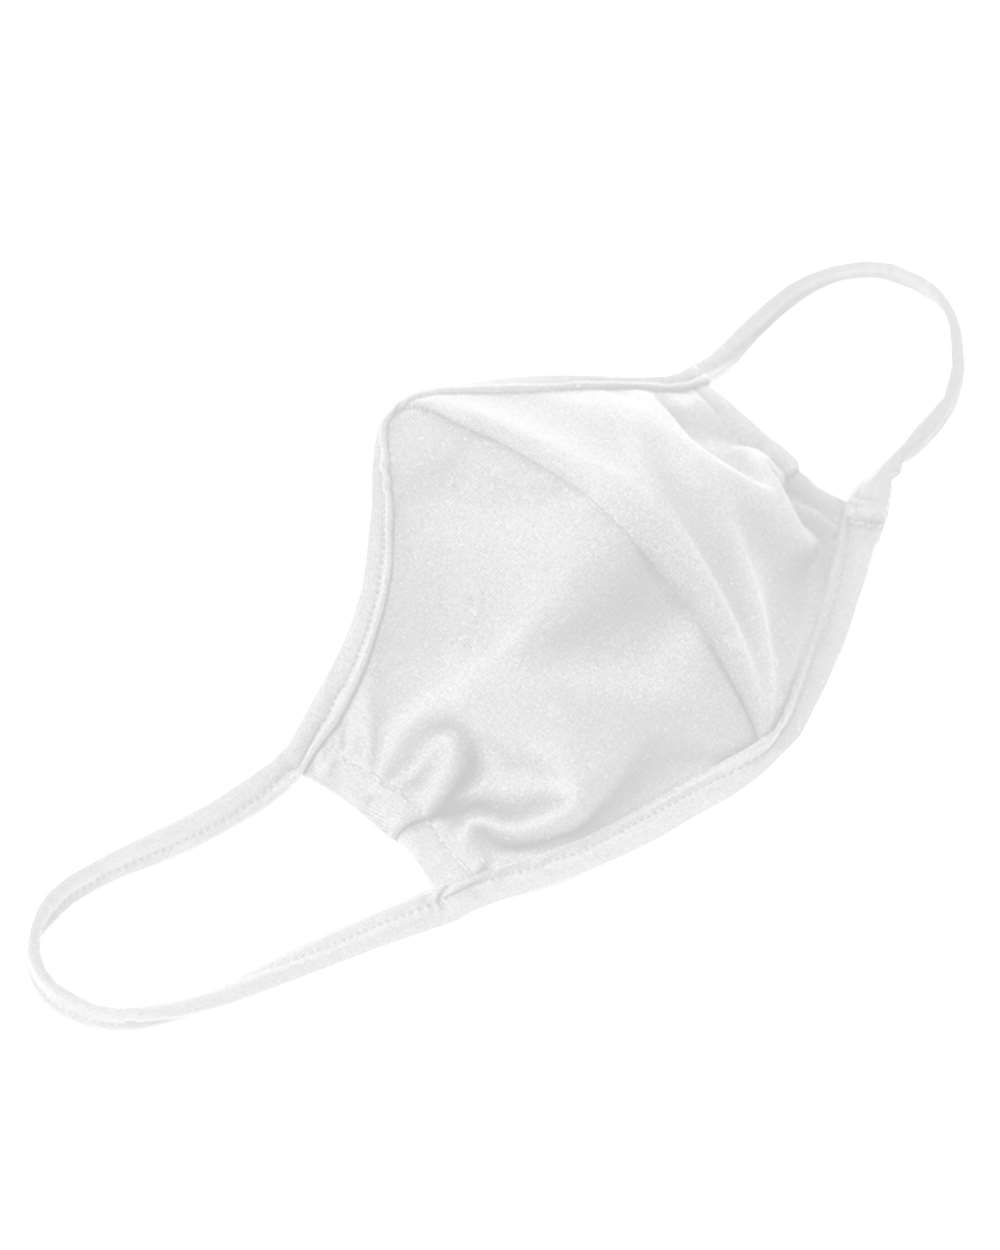 Reusable Face Mask (White) Accessories Badger 